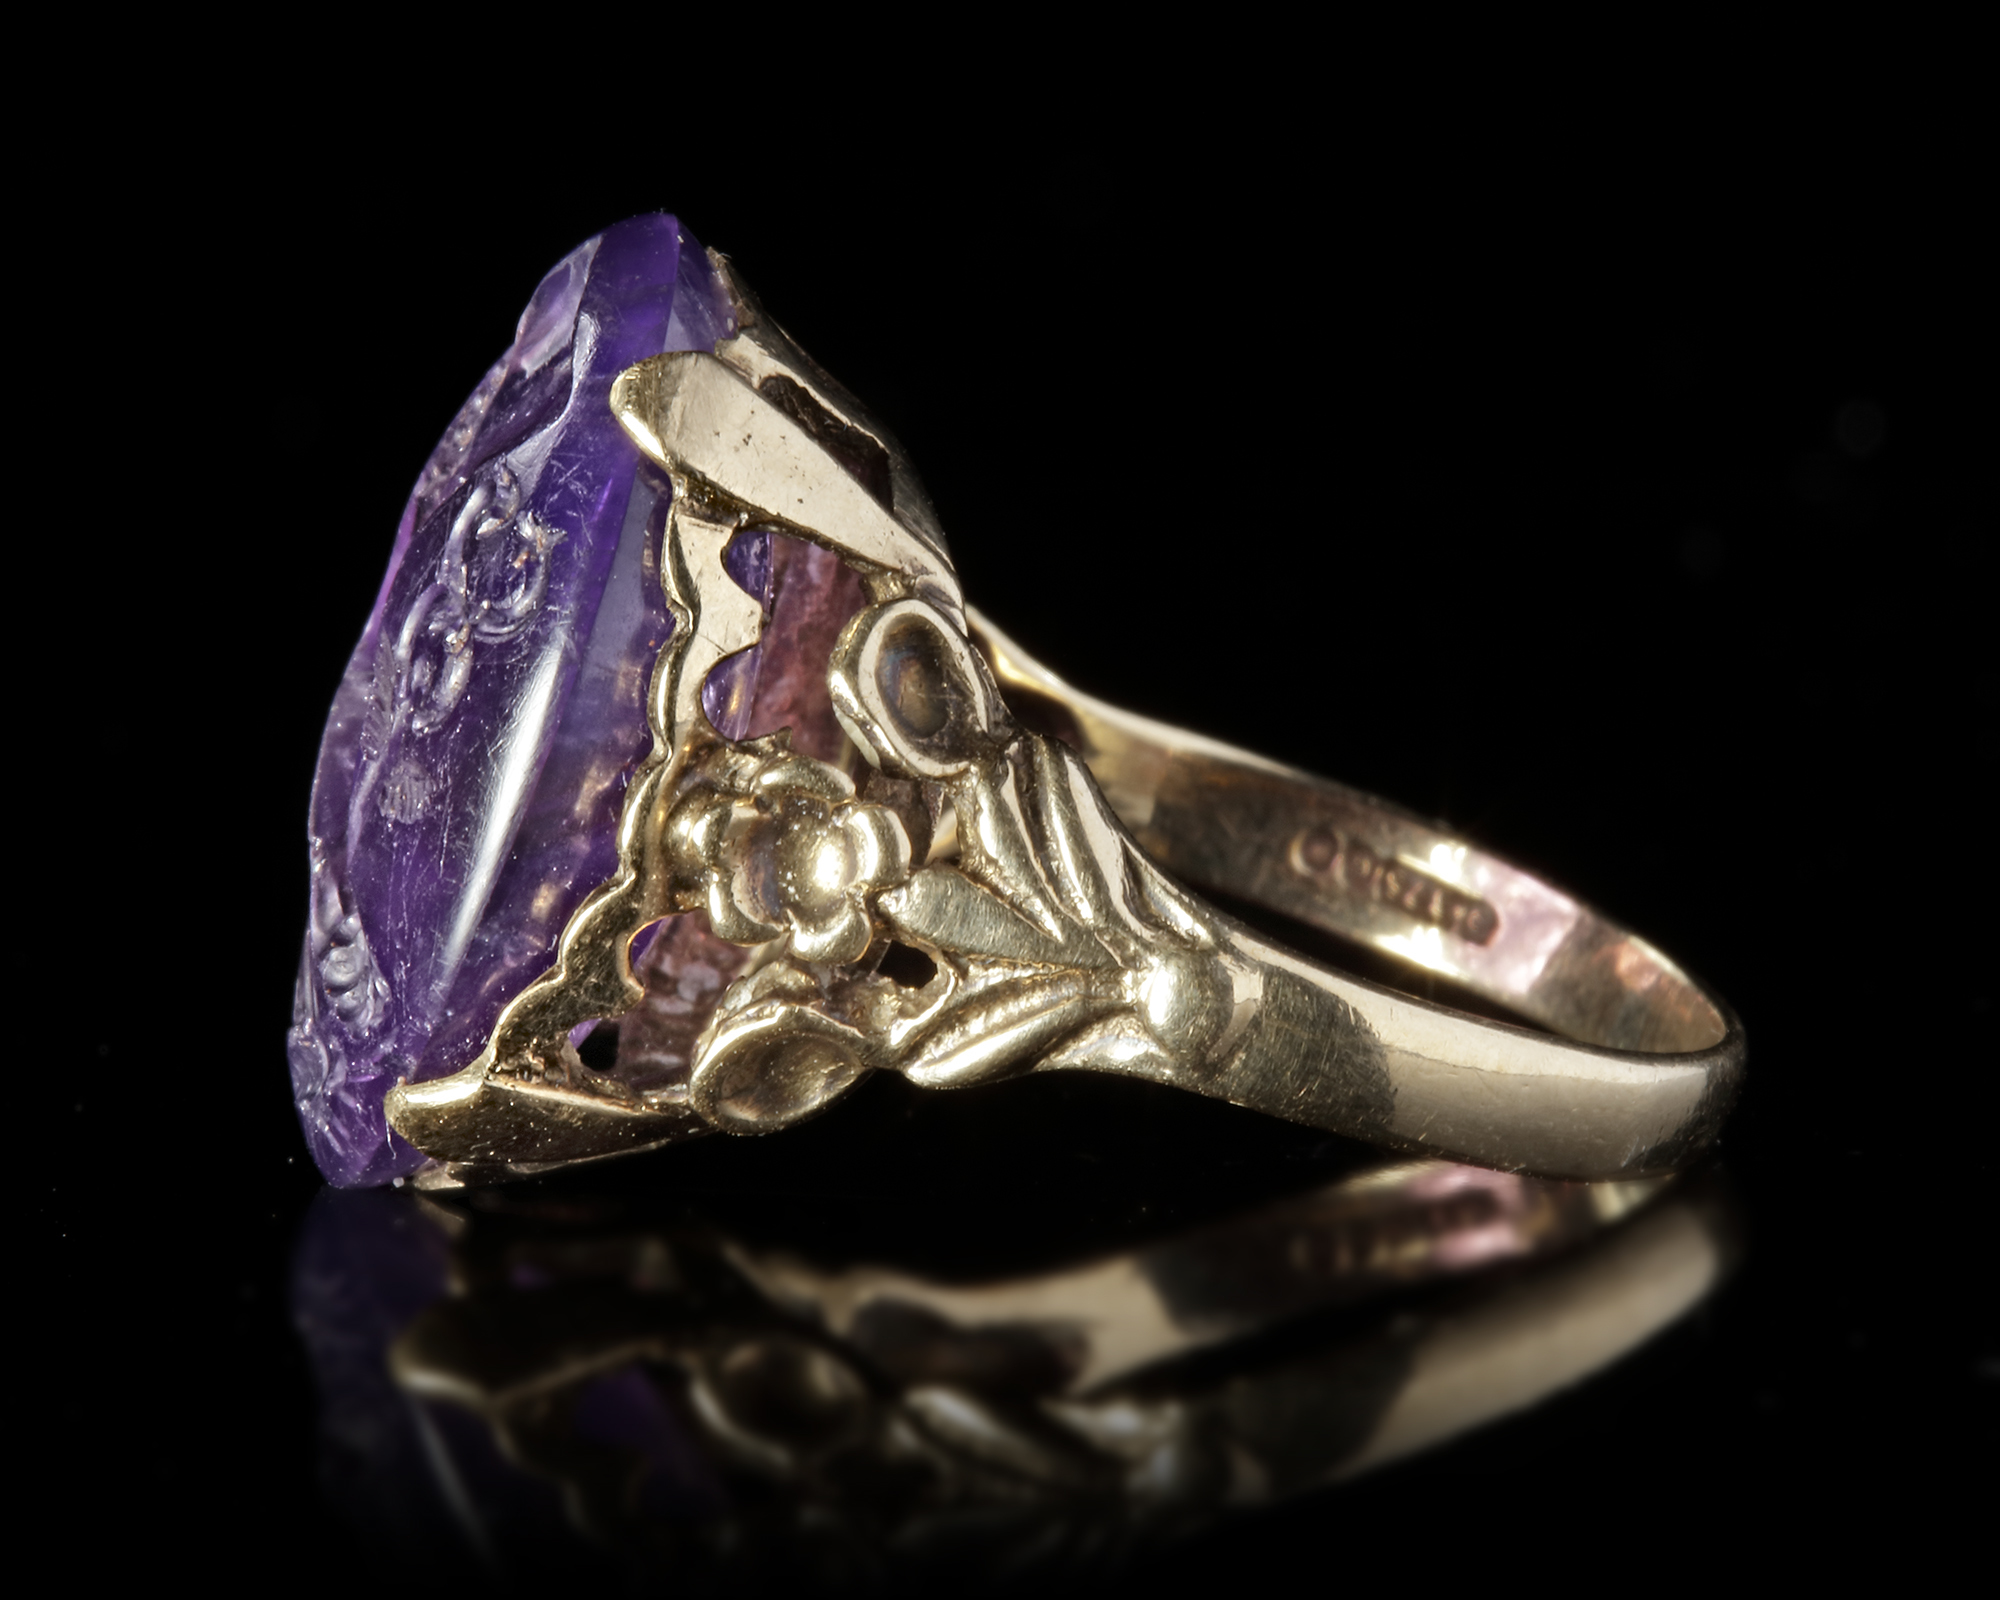 A ROMAN INTAGLIO IN AMETHYST WITH A FOOT OF MERCURY AND BUTTERFLY MOUNTED IN A 19TH CENTURY RING, IN - Image 2 of 4